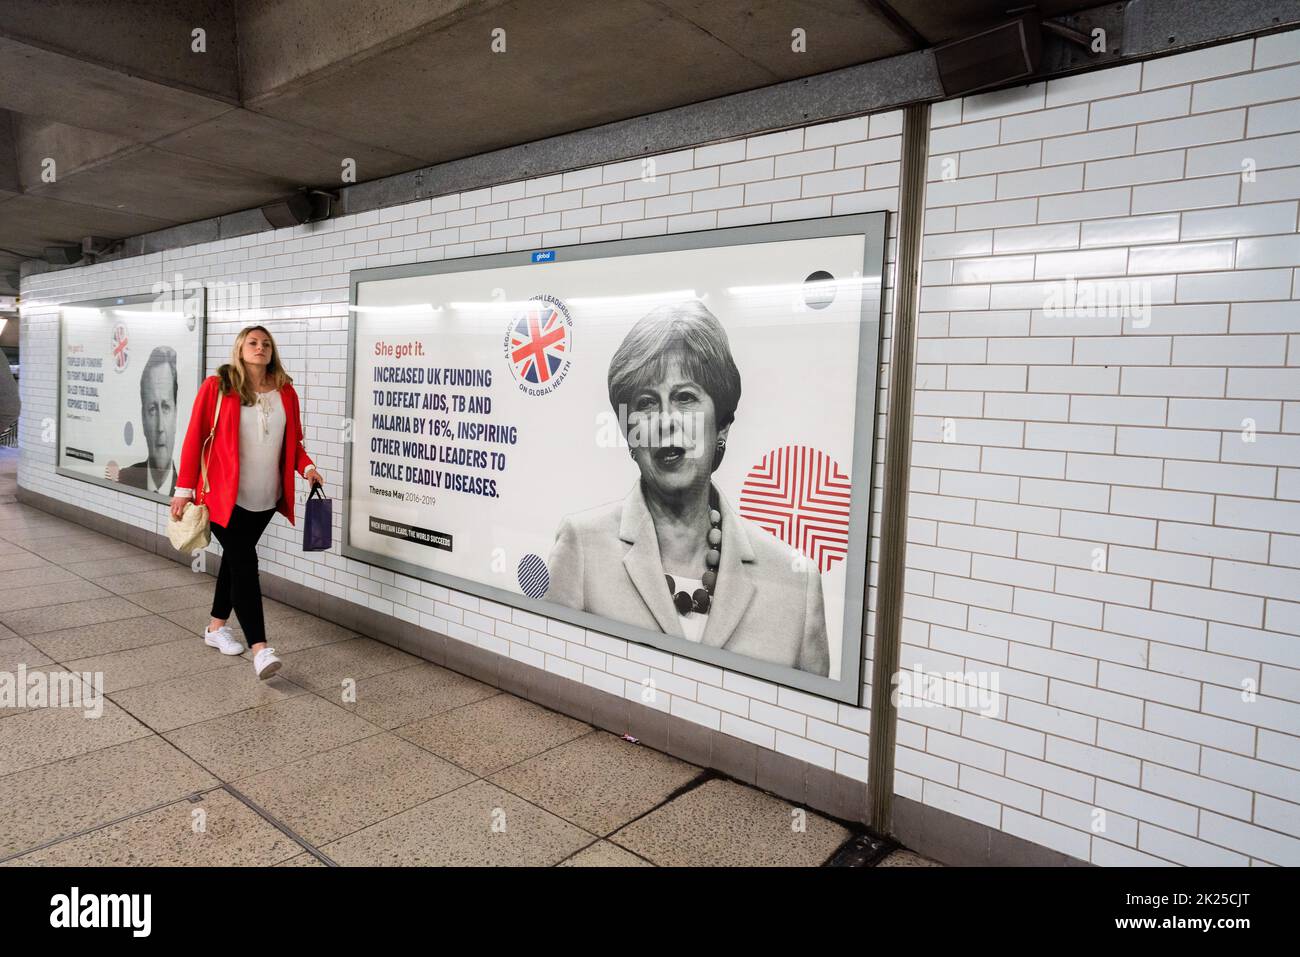 London UK. 22 September 2022.  Former Conservative PM Theresa May. A poster on the London Underground  by One Global Campaign to highlight the impact British Prime Ministers have had on global health to combat infectious diseases  Credit: amer ghazzal/Alamy Live News. Stock Photo